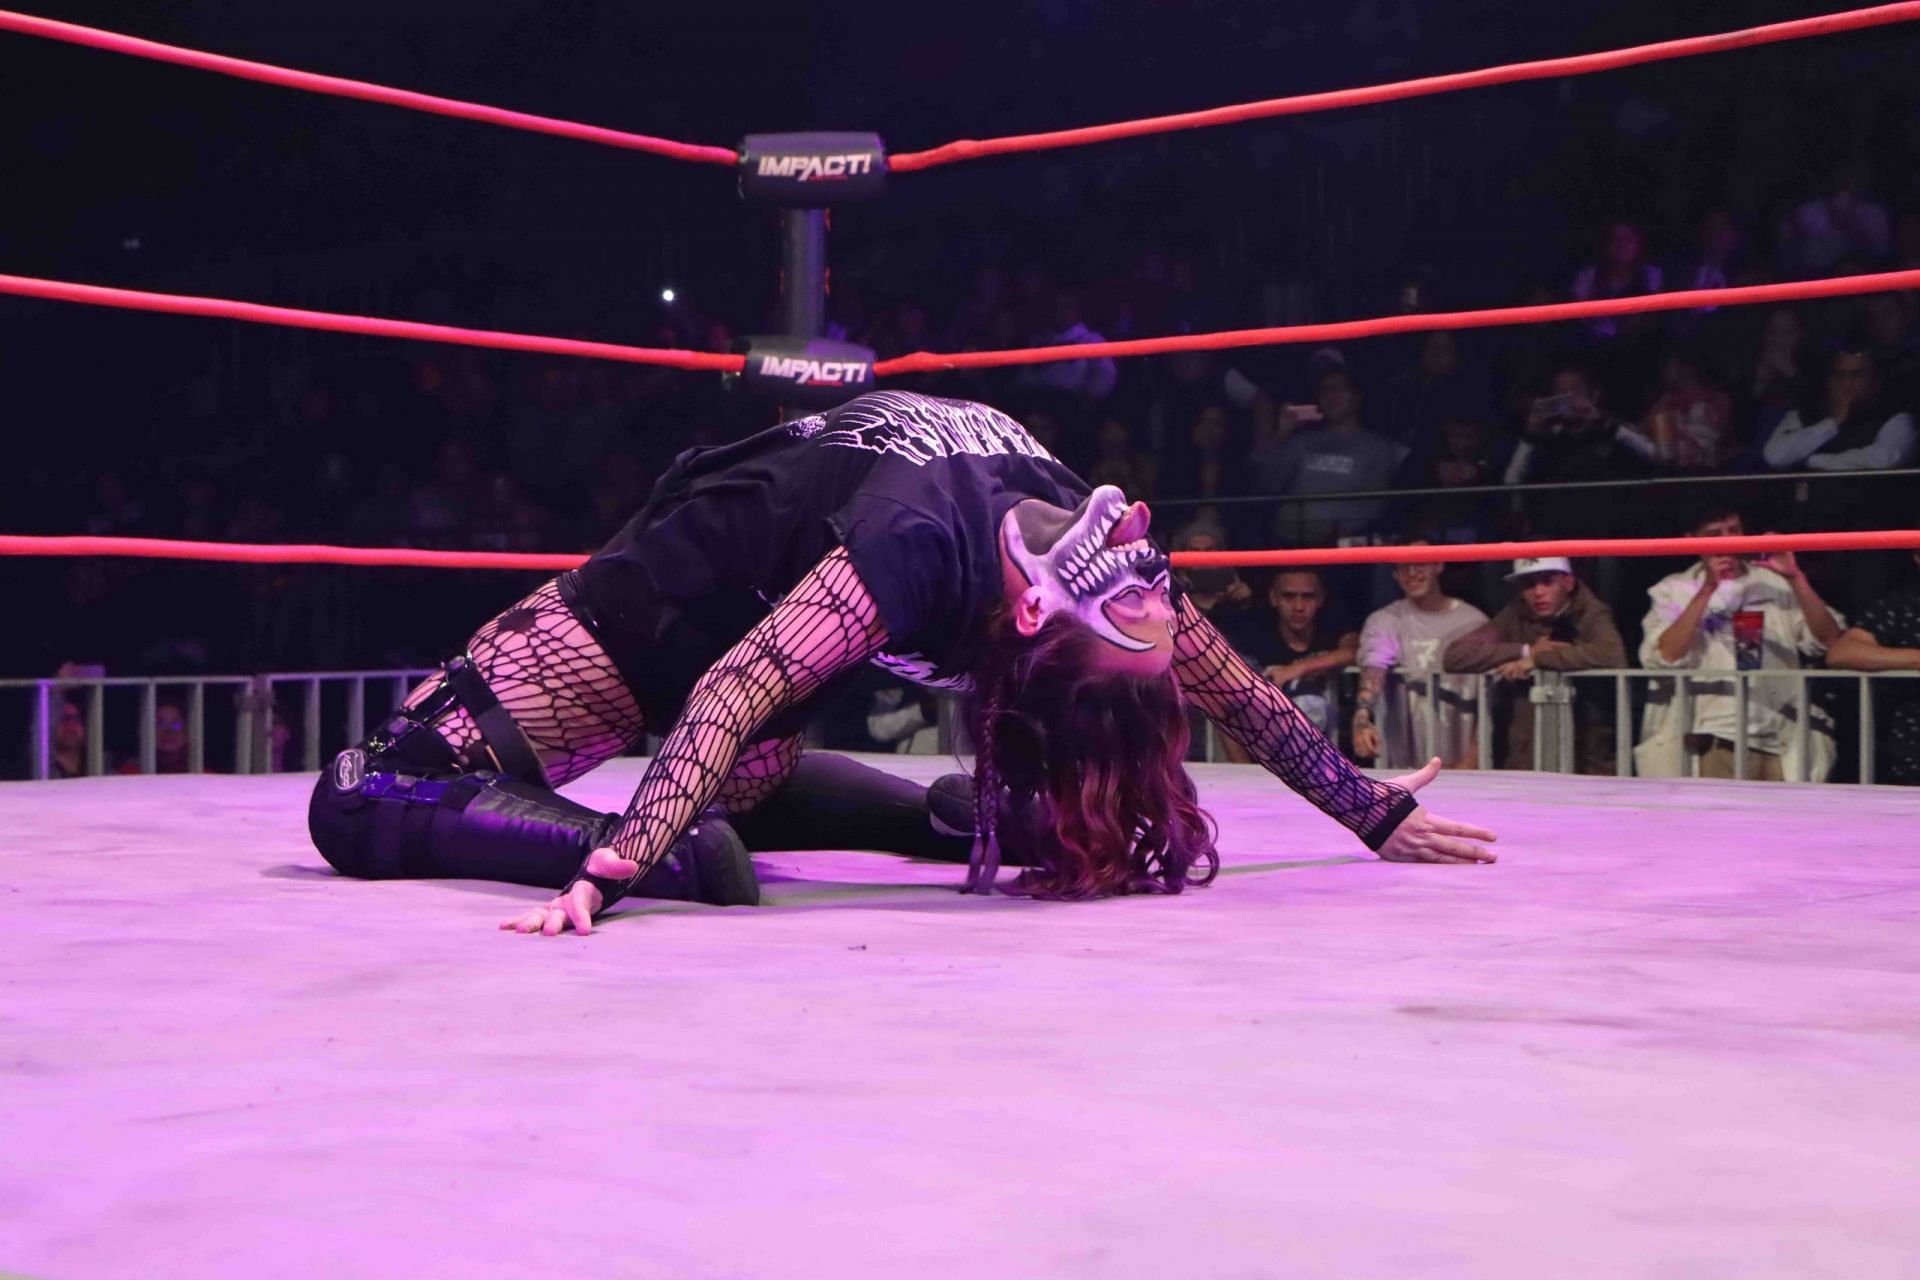 A picture of Rosemary from the official IMPACT Wrestling website